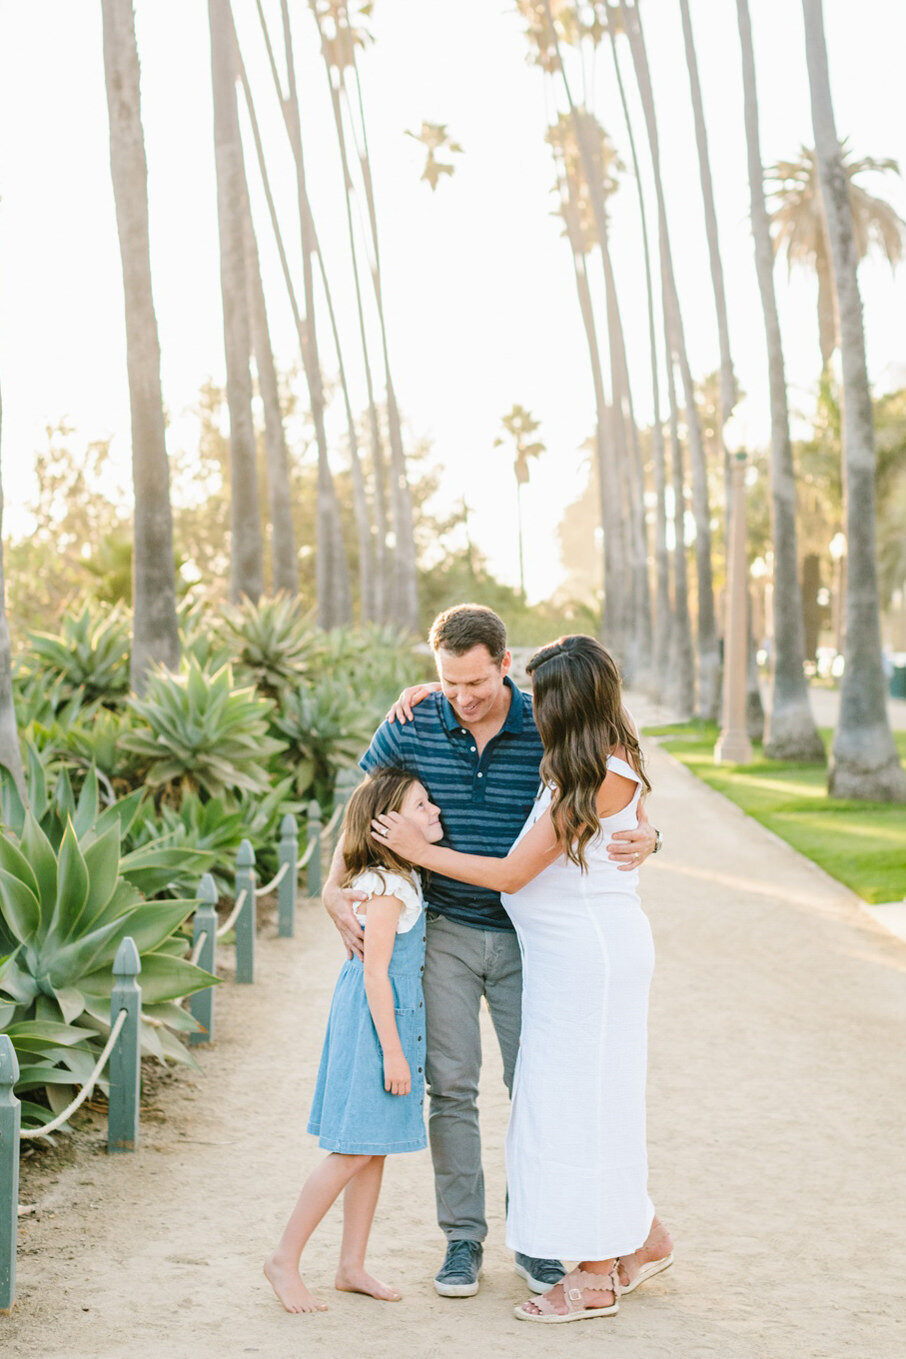 Best California and Texas Family Photographer-Jodee Debes Photography-168